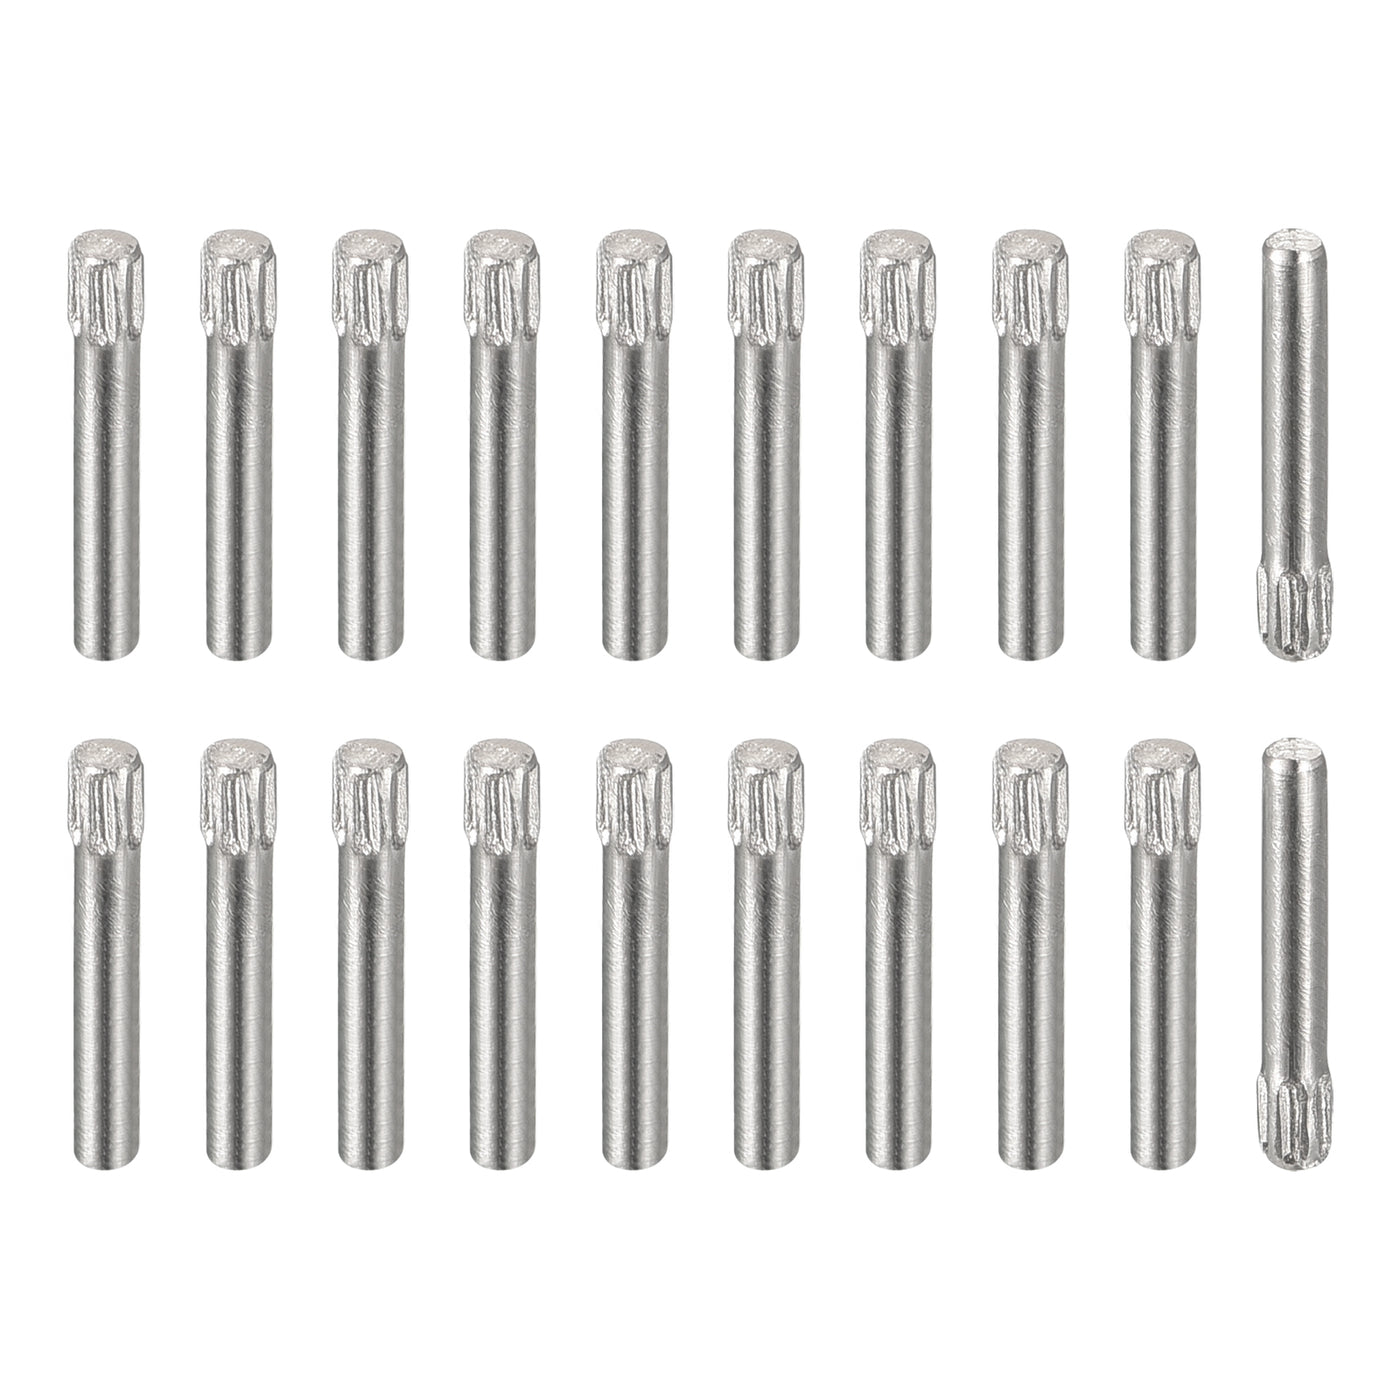 uxcell Uxcell 1.5x10mm 304 Stainless Steel Dowel Pins, 20Pcs Knurled Head Flat End Dowel Pin